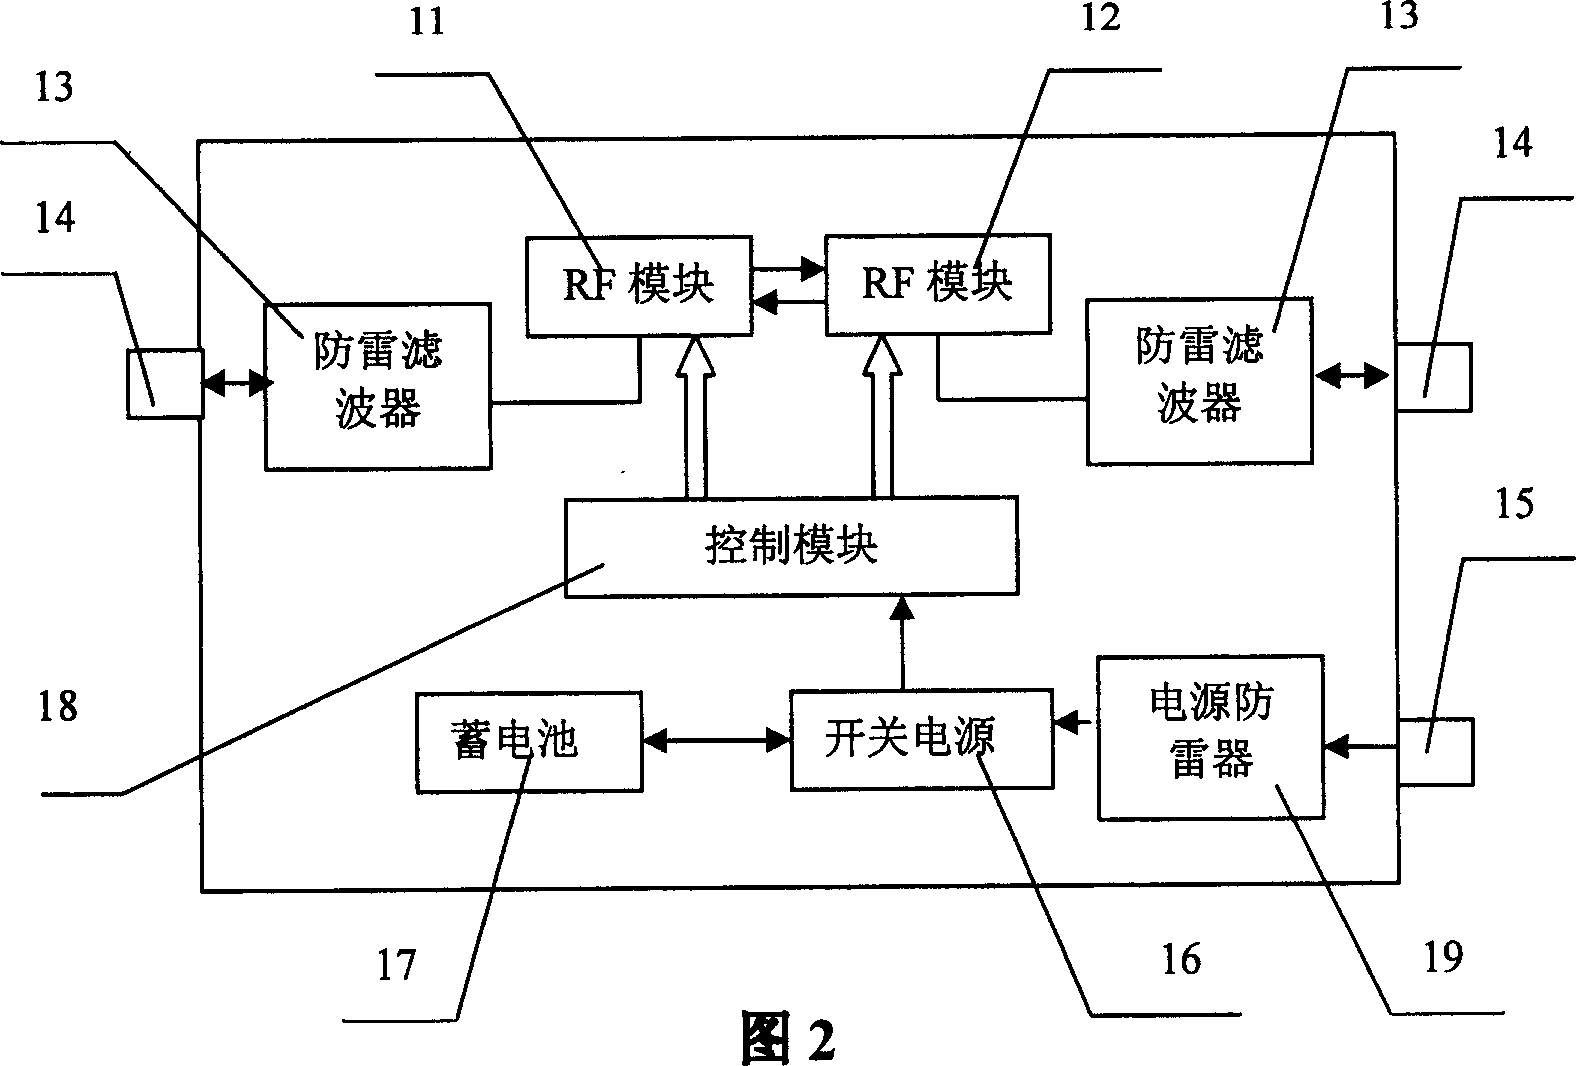 Direct transmitting station for synchronous CDMA system and its control